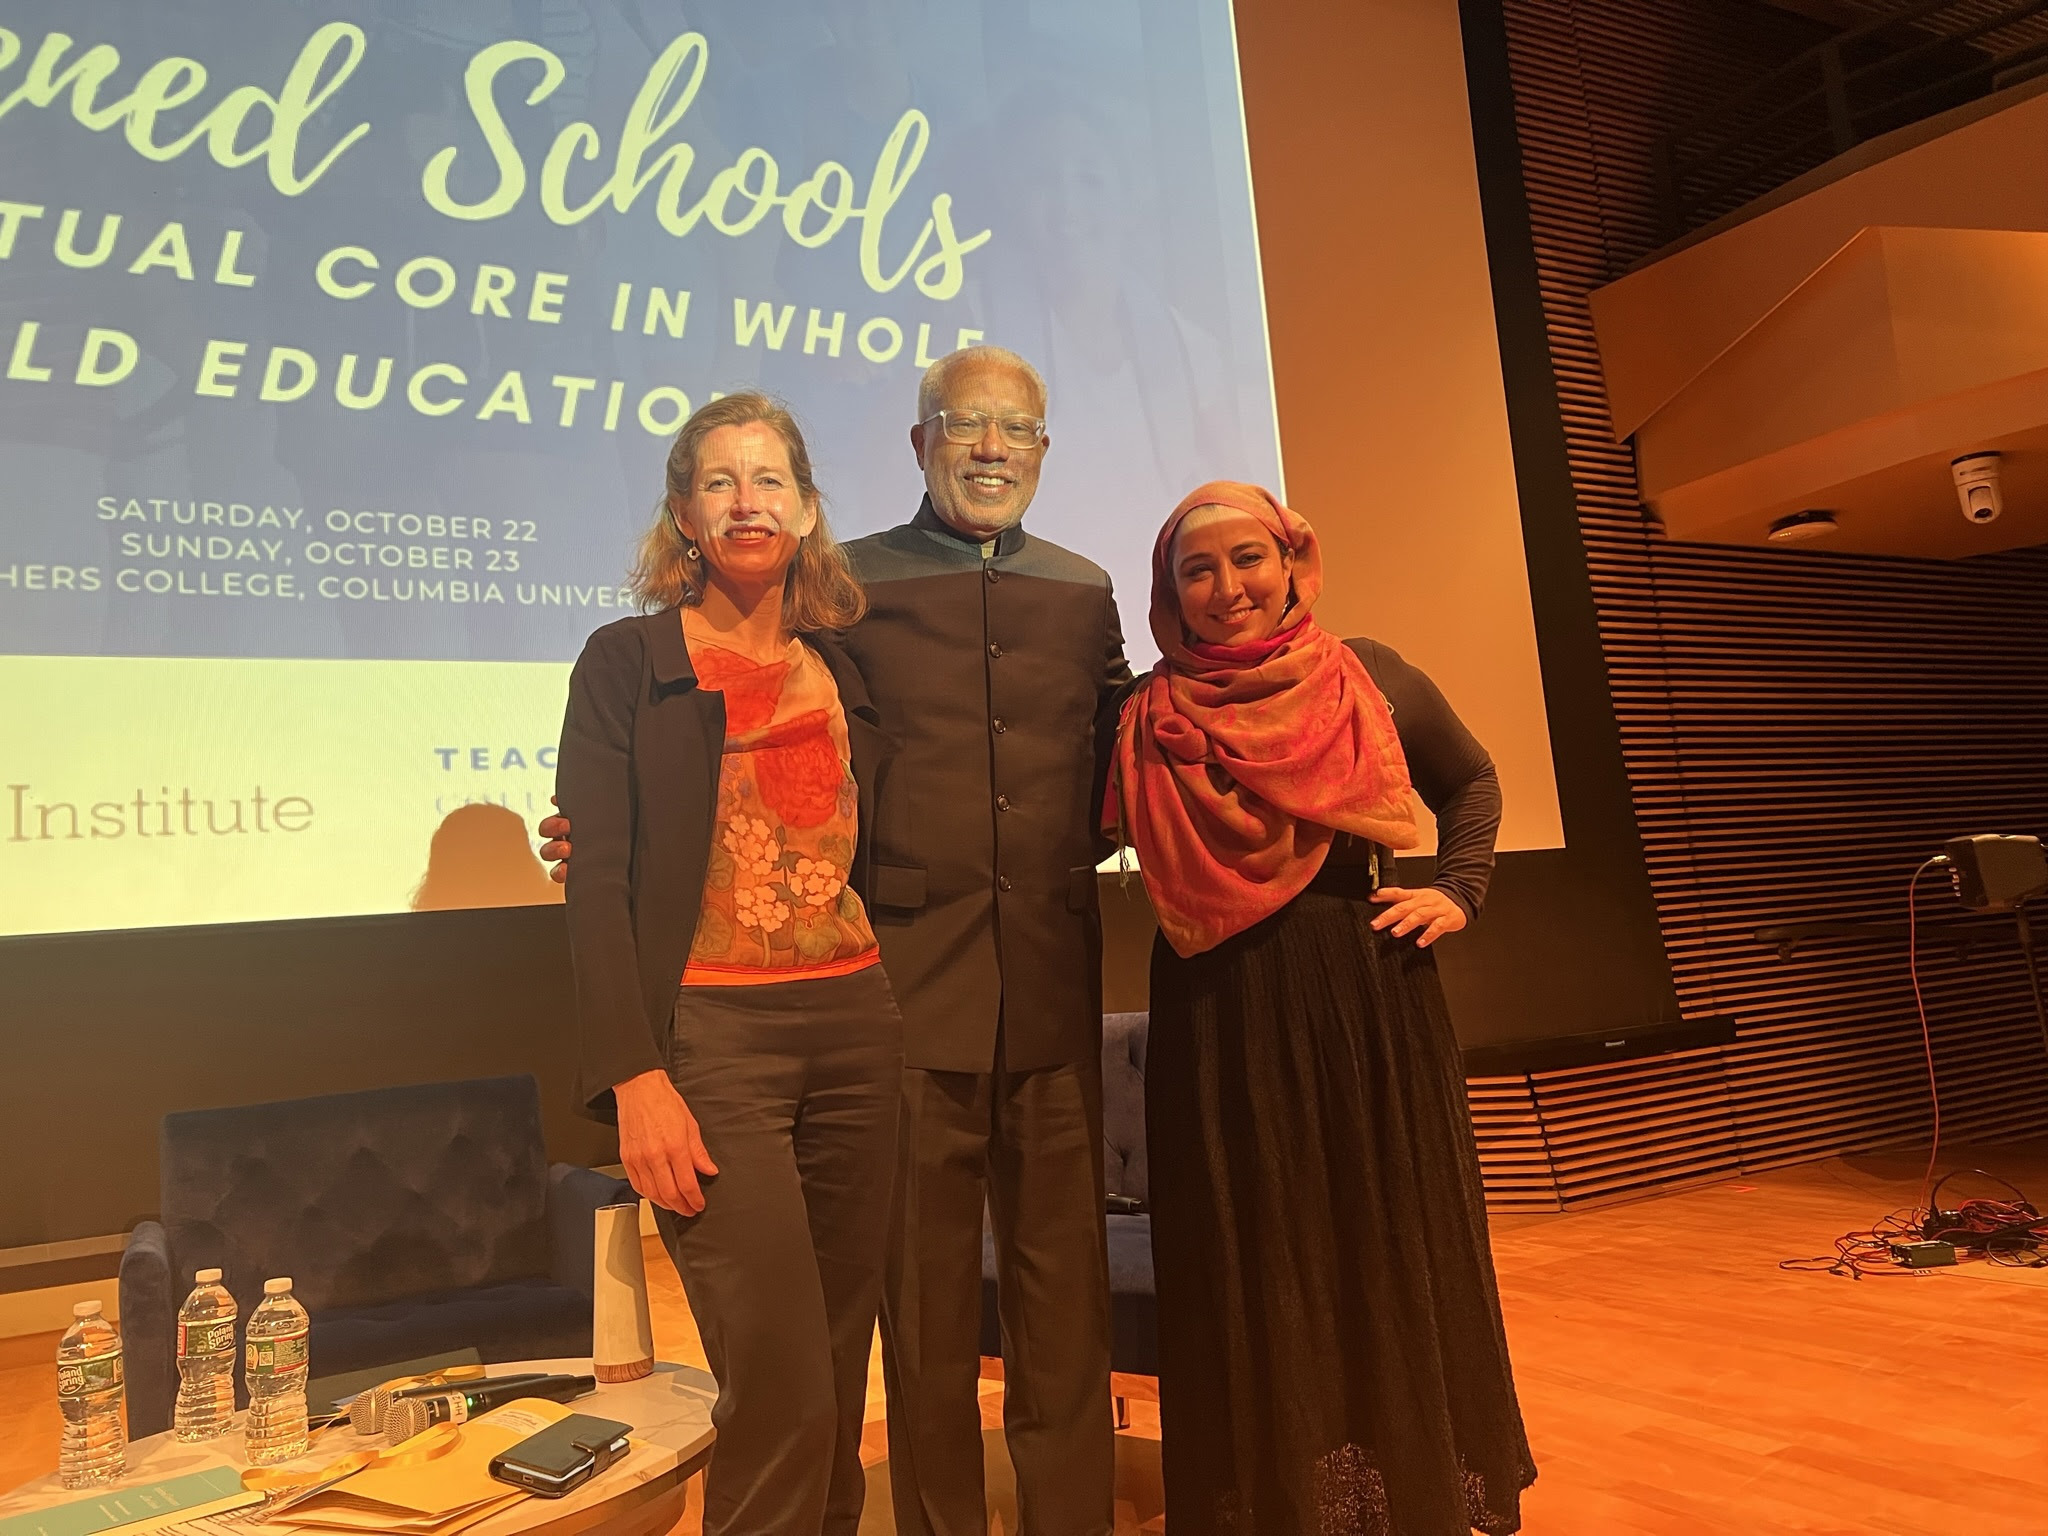 Najeeba and presenters at the National Spirituality in Education event.